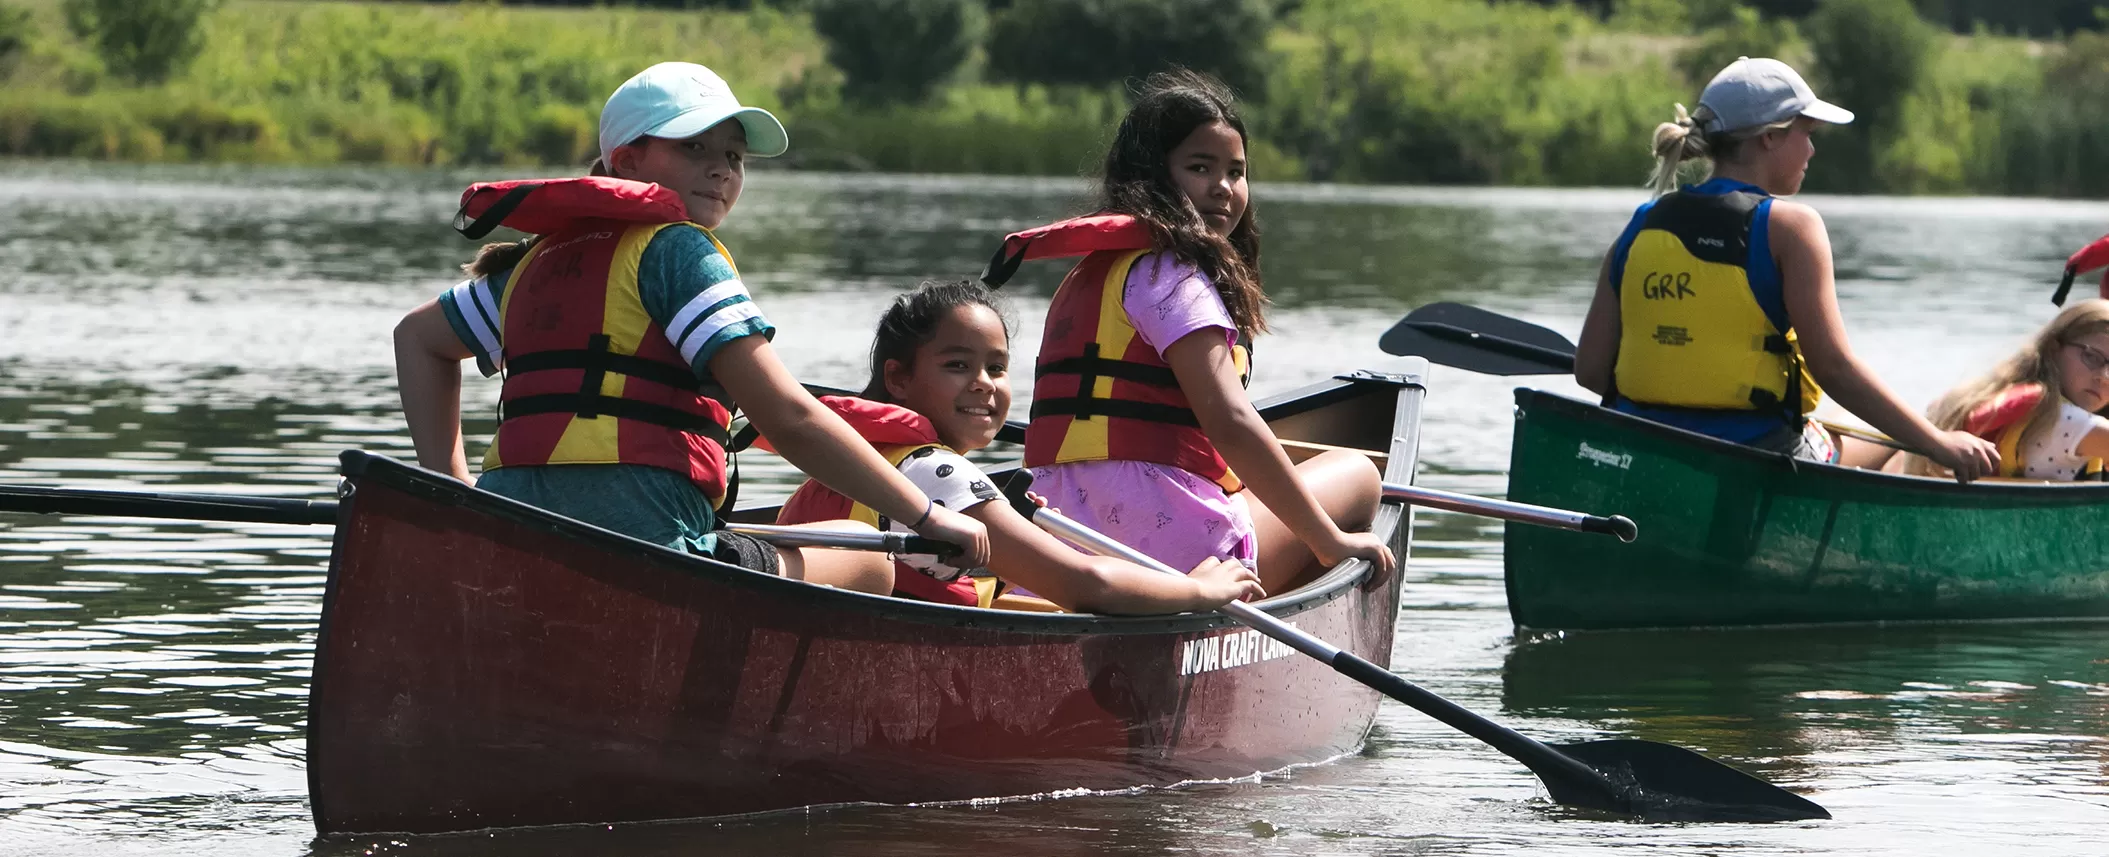 Group of campers canoeing in water at Christie Conservation Park